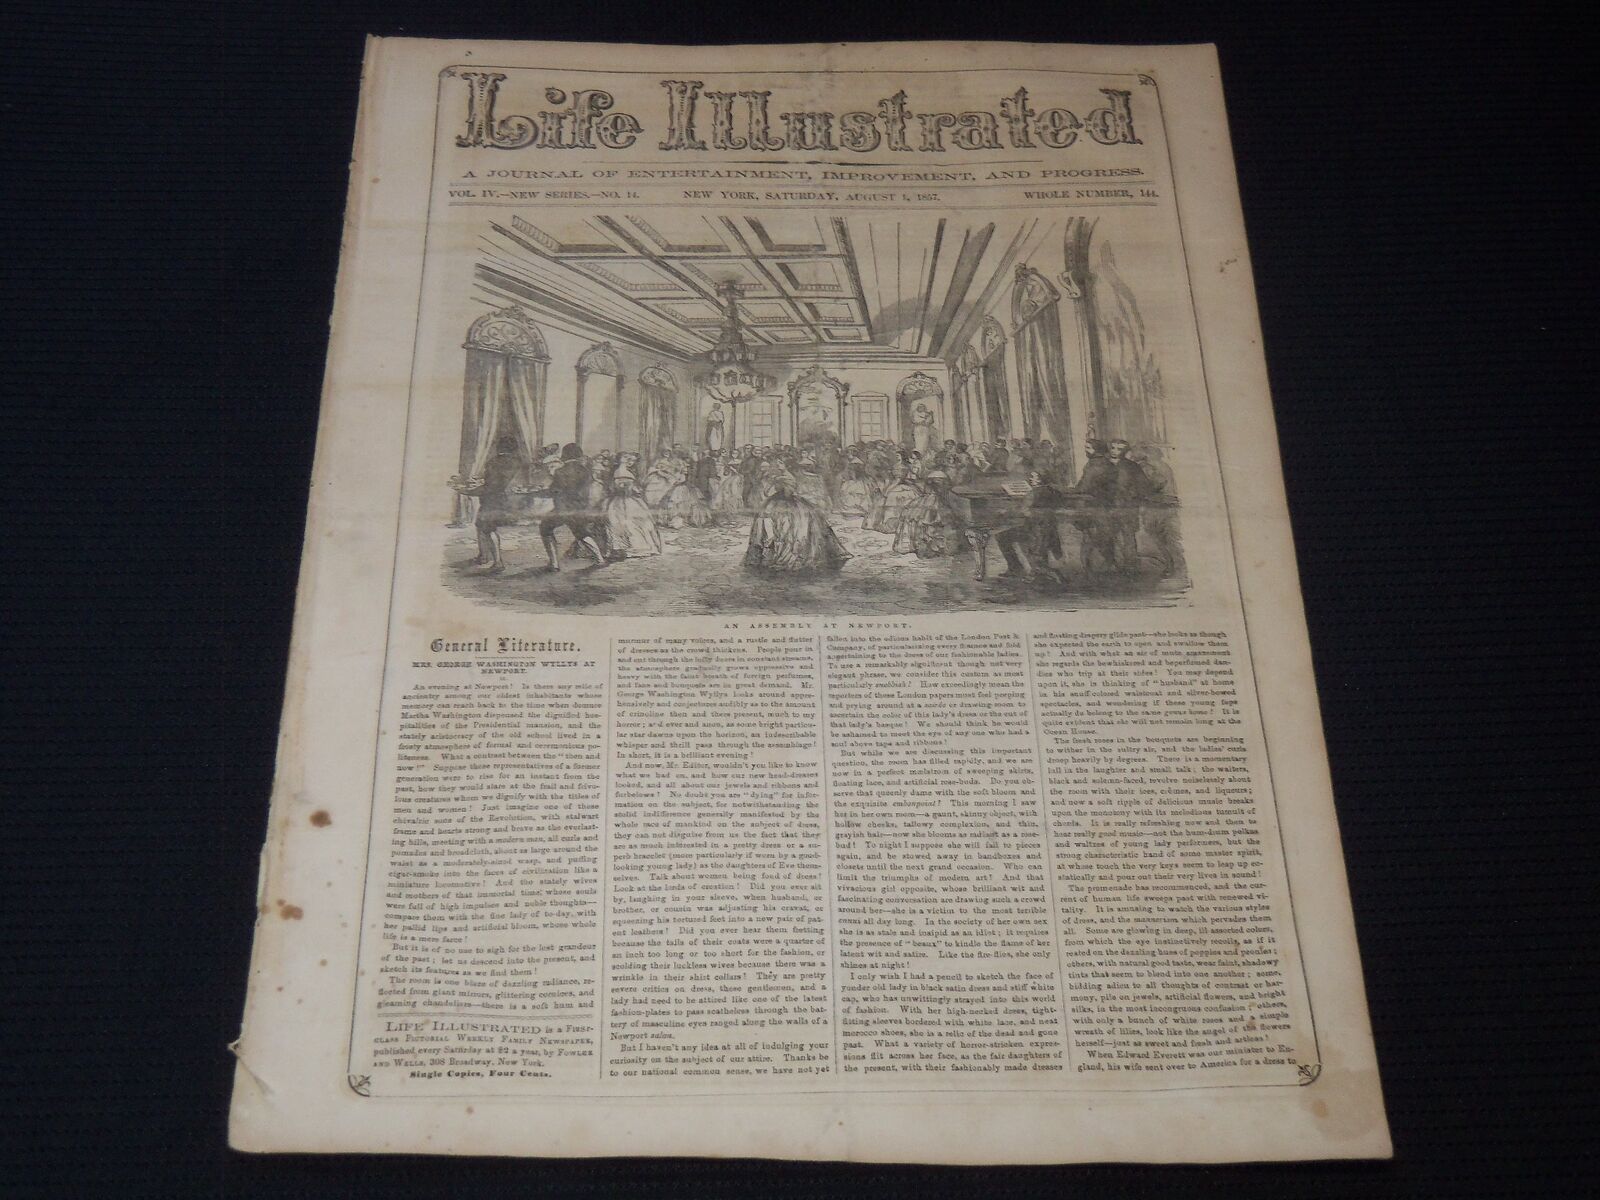 1857 AUGUST 1 LIFE ILLUSTRATED NEWSPAPER - AN ASSEMBLY AT NEWPORT - NP 5925